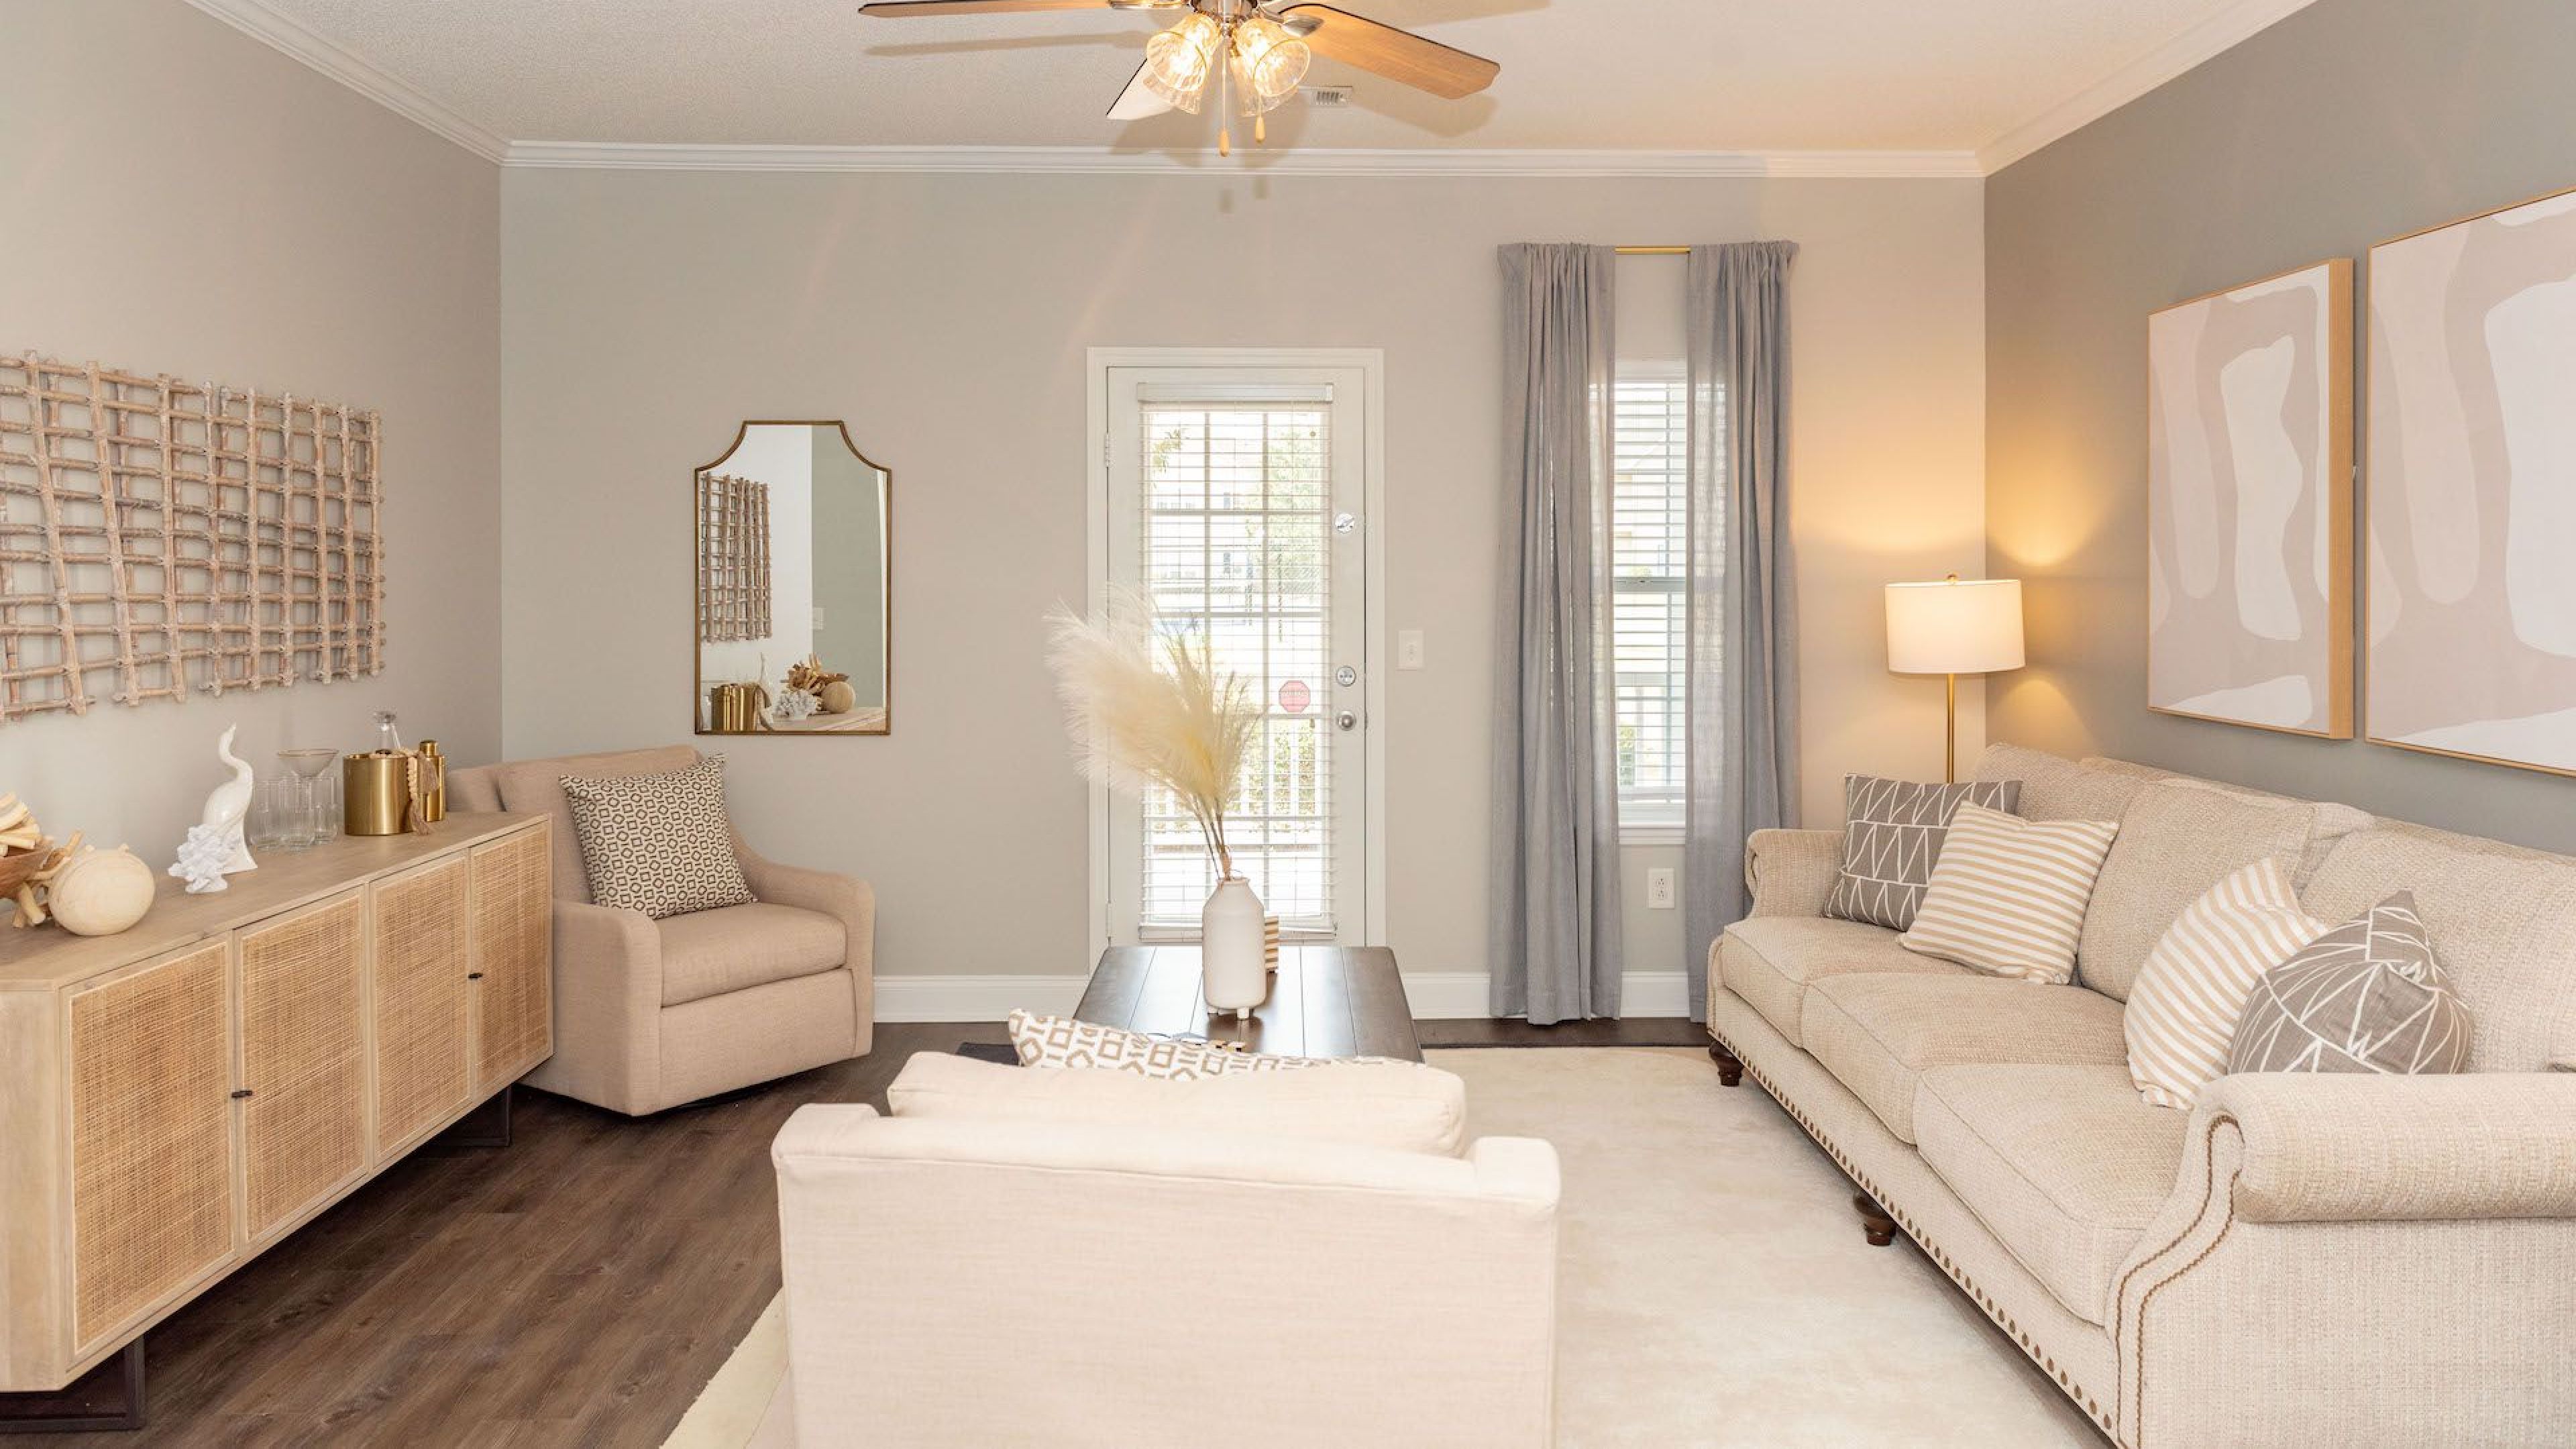 Cozy living room with neutral tones and modern decor at Hawthorne Meadowview apartments, GA